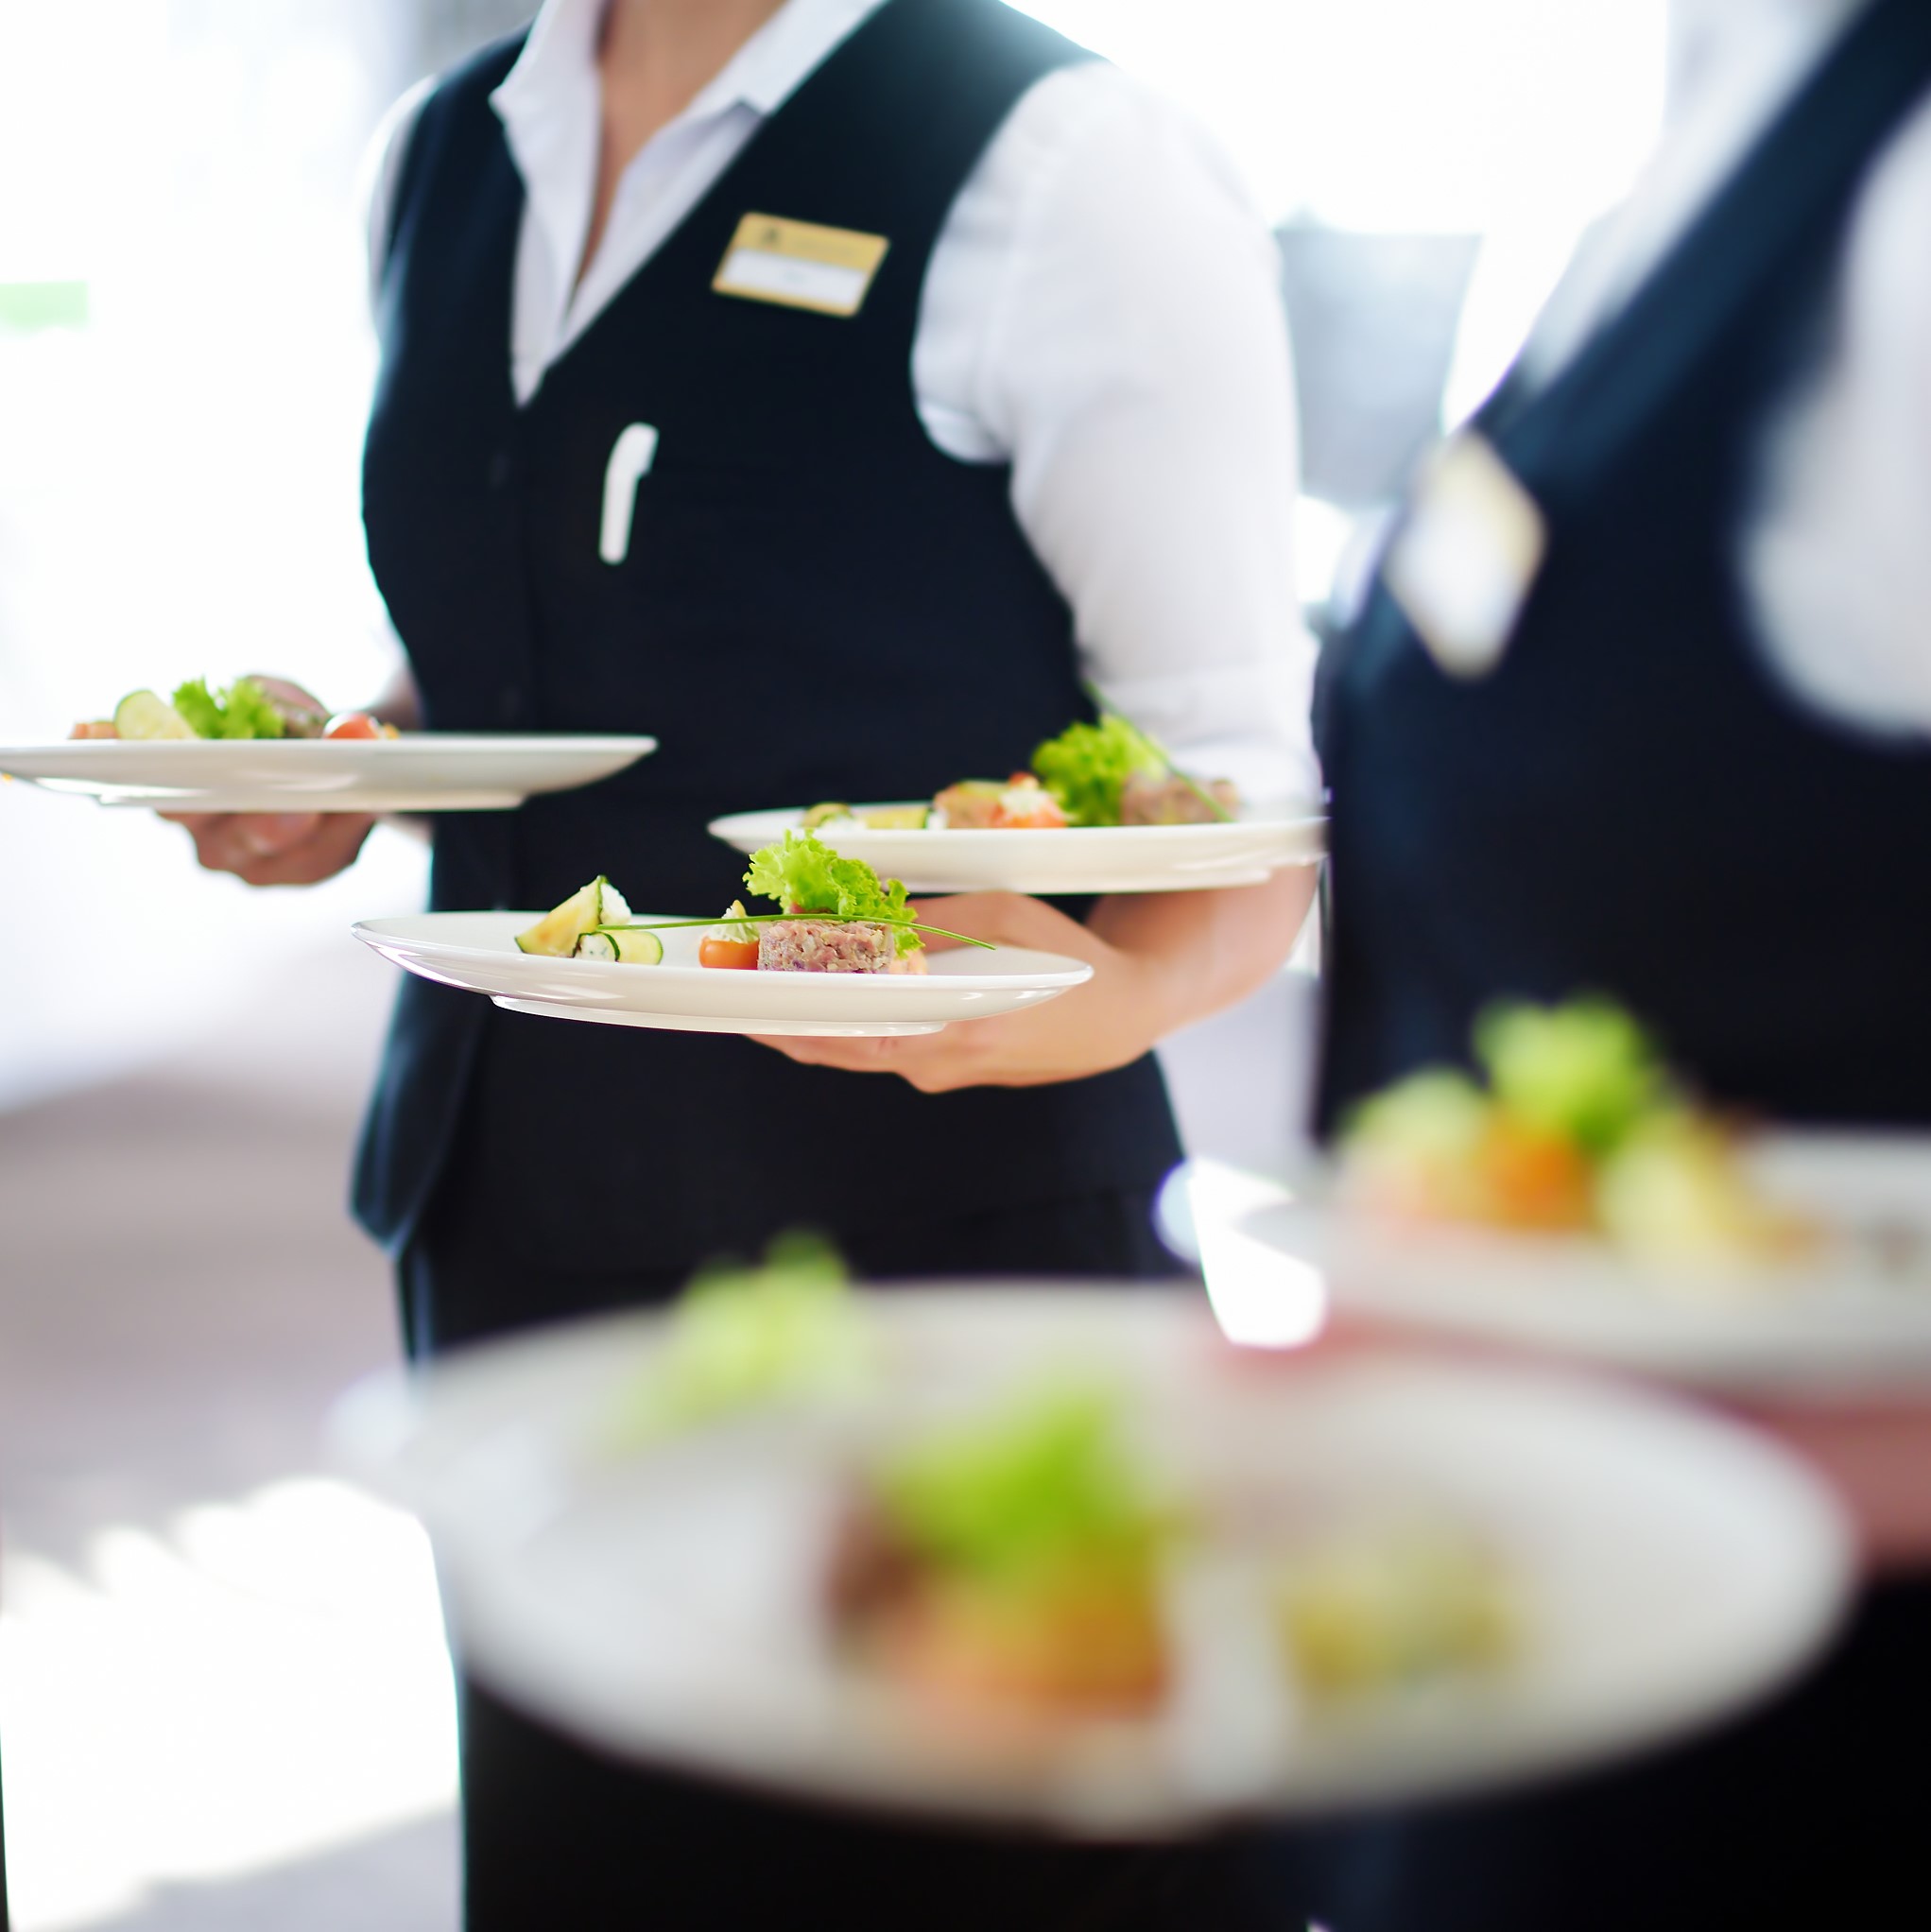 Waiter carrying plates with meat dish on some festive event, party or wedding reception